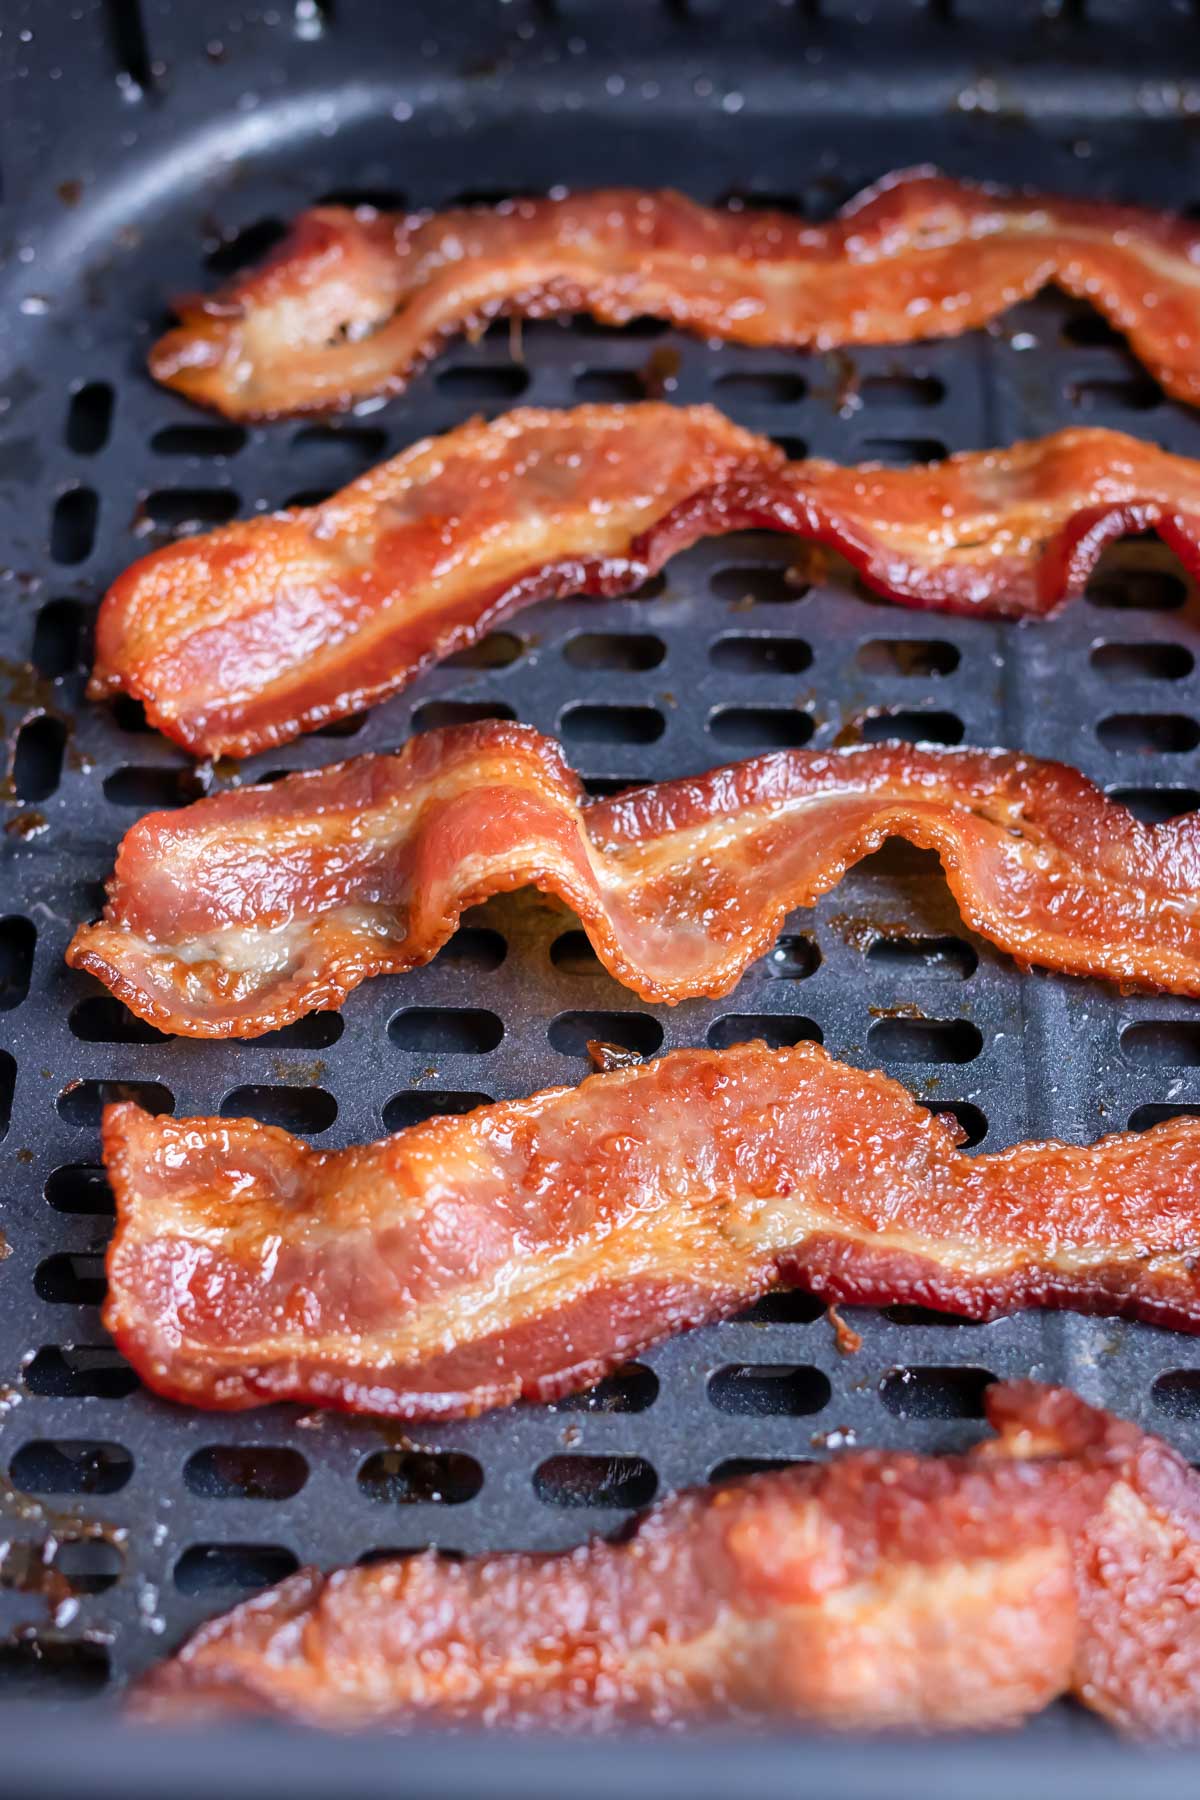 Bacon is made extra crispy in the air fryer.